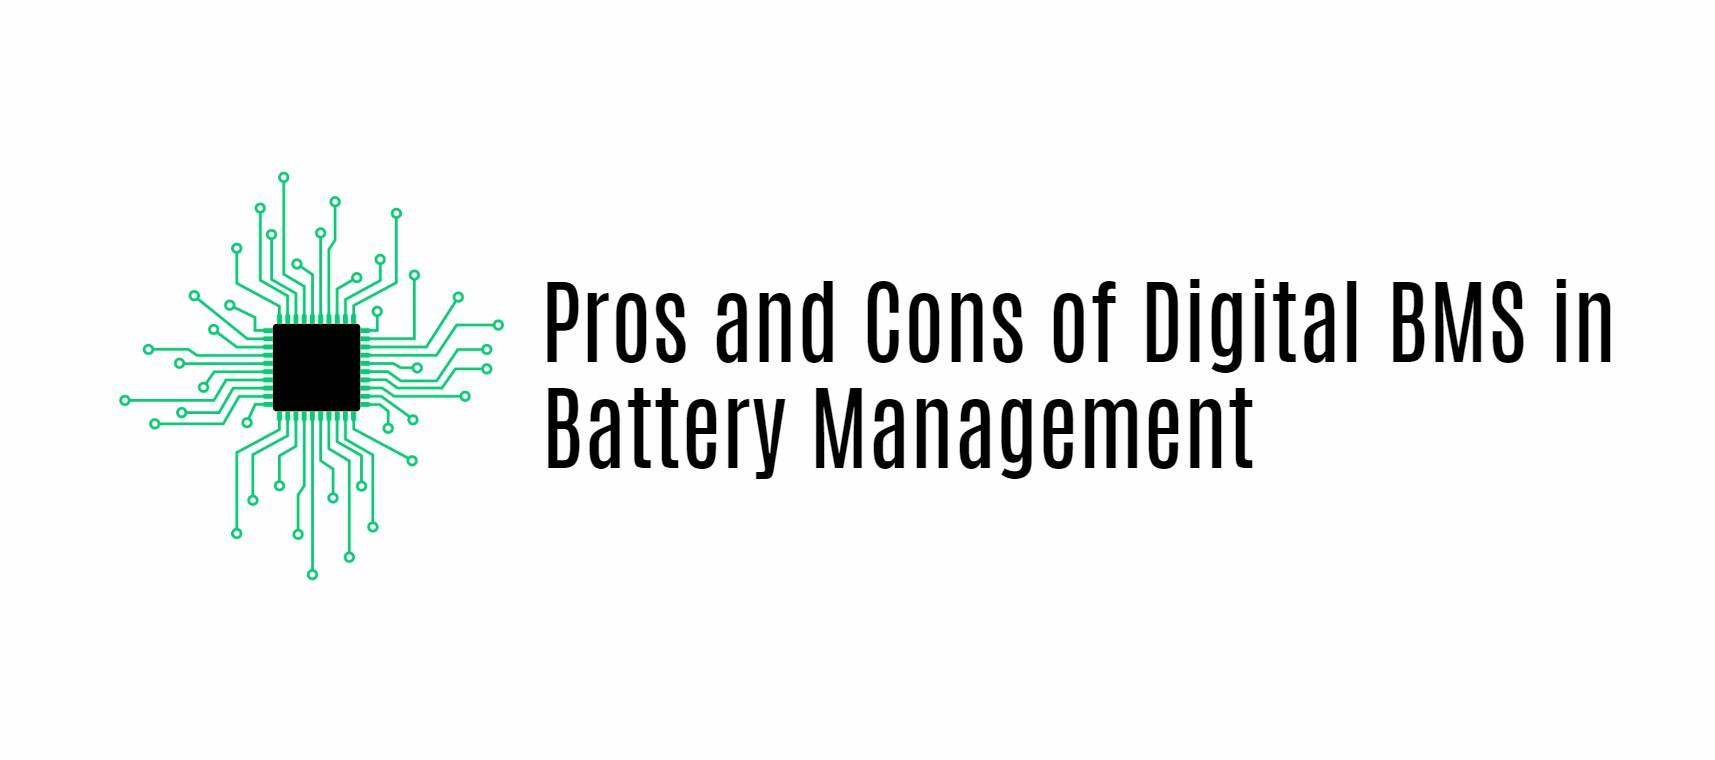 Pros and Cons of Digital BMS in Battery Management